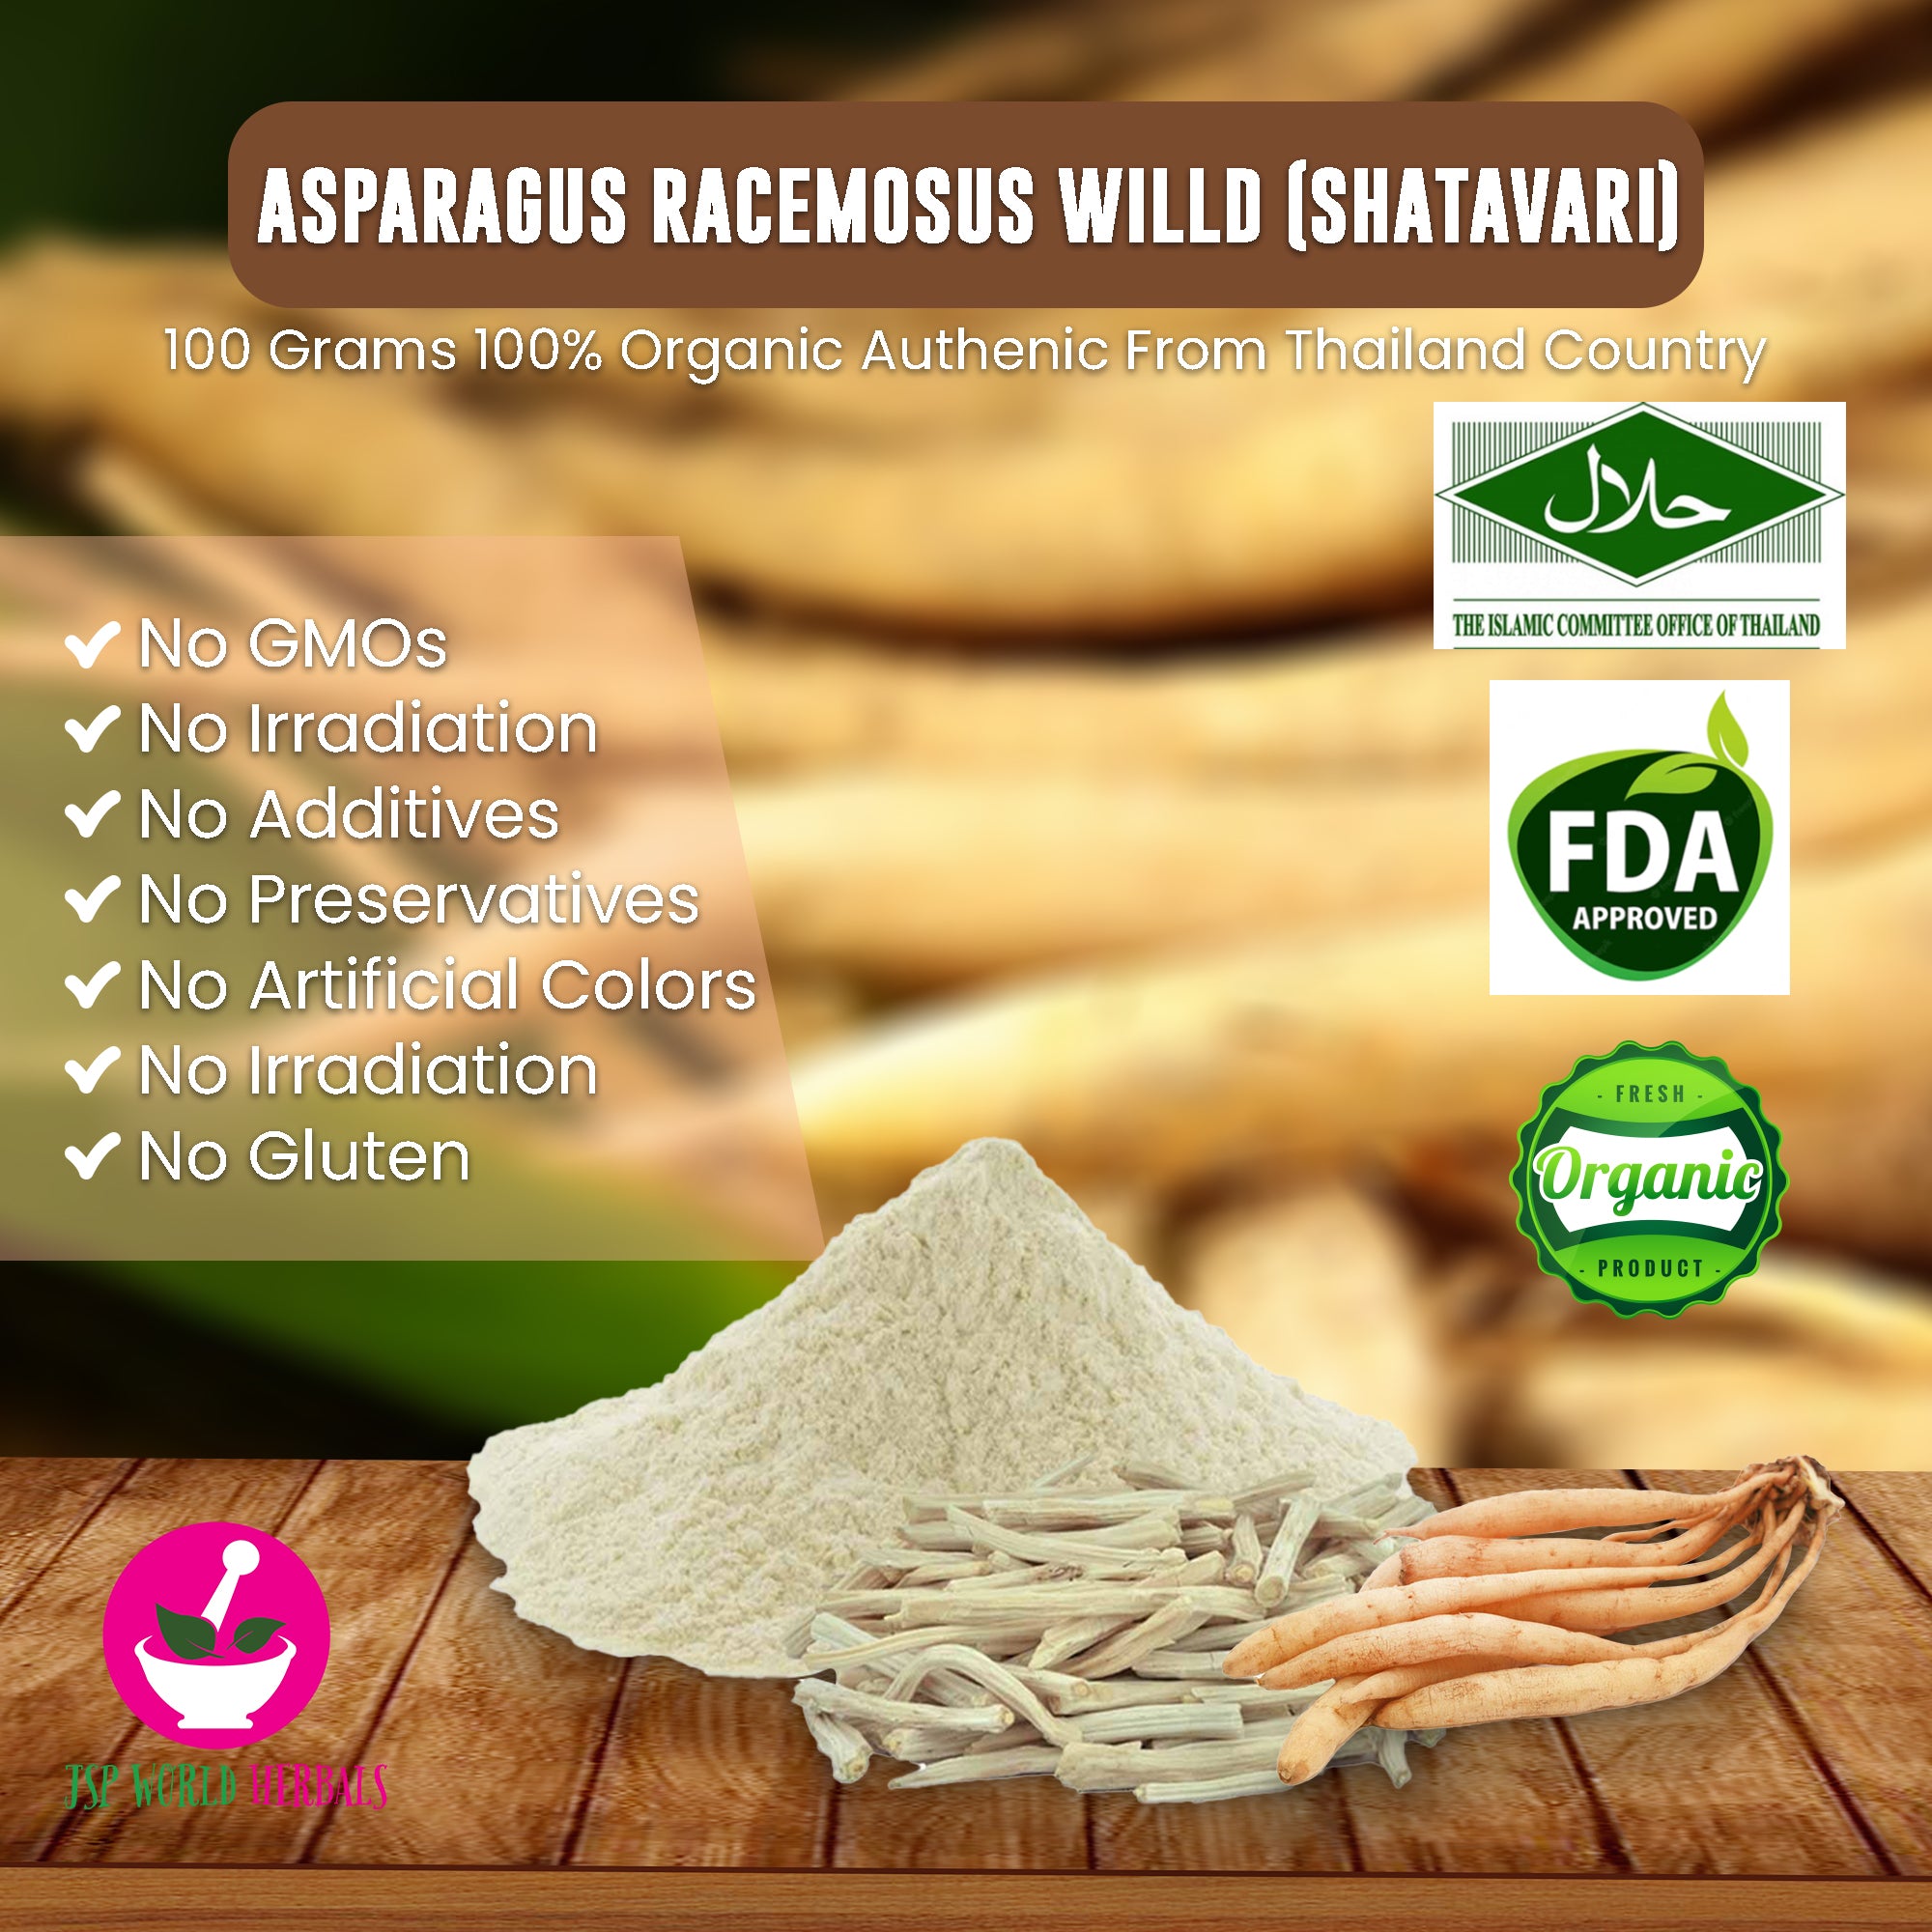 Asparagus racemosus might have antioxidant and antibacterial effects. It might also stimulate the immune system. People use Asparagus racemosus for athletic performance, diabetes, HIV/AIDS, lactation, and many other purposes, but there is no good scientific evidence to support these uses